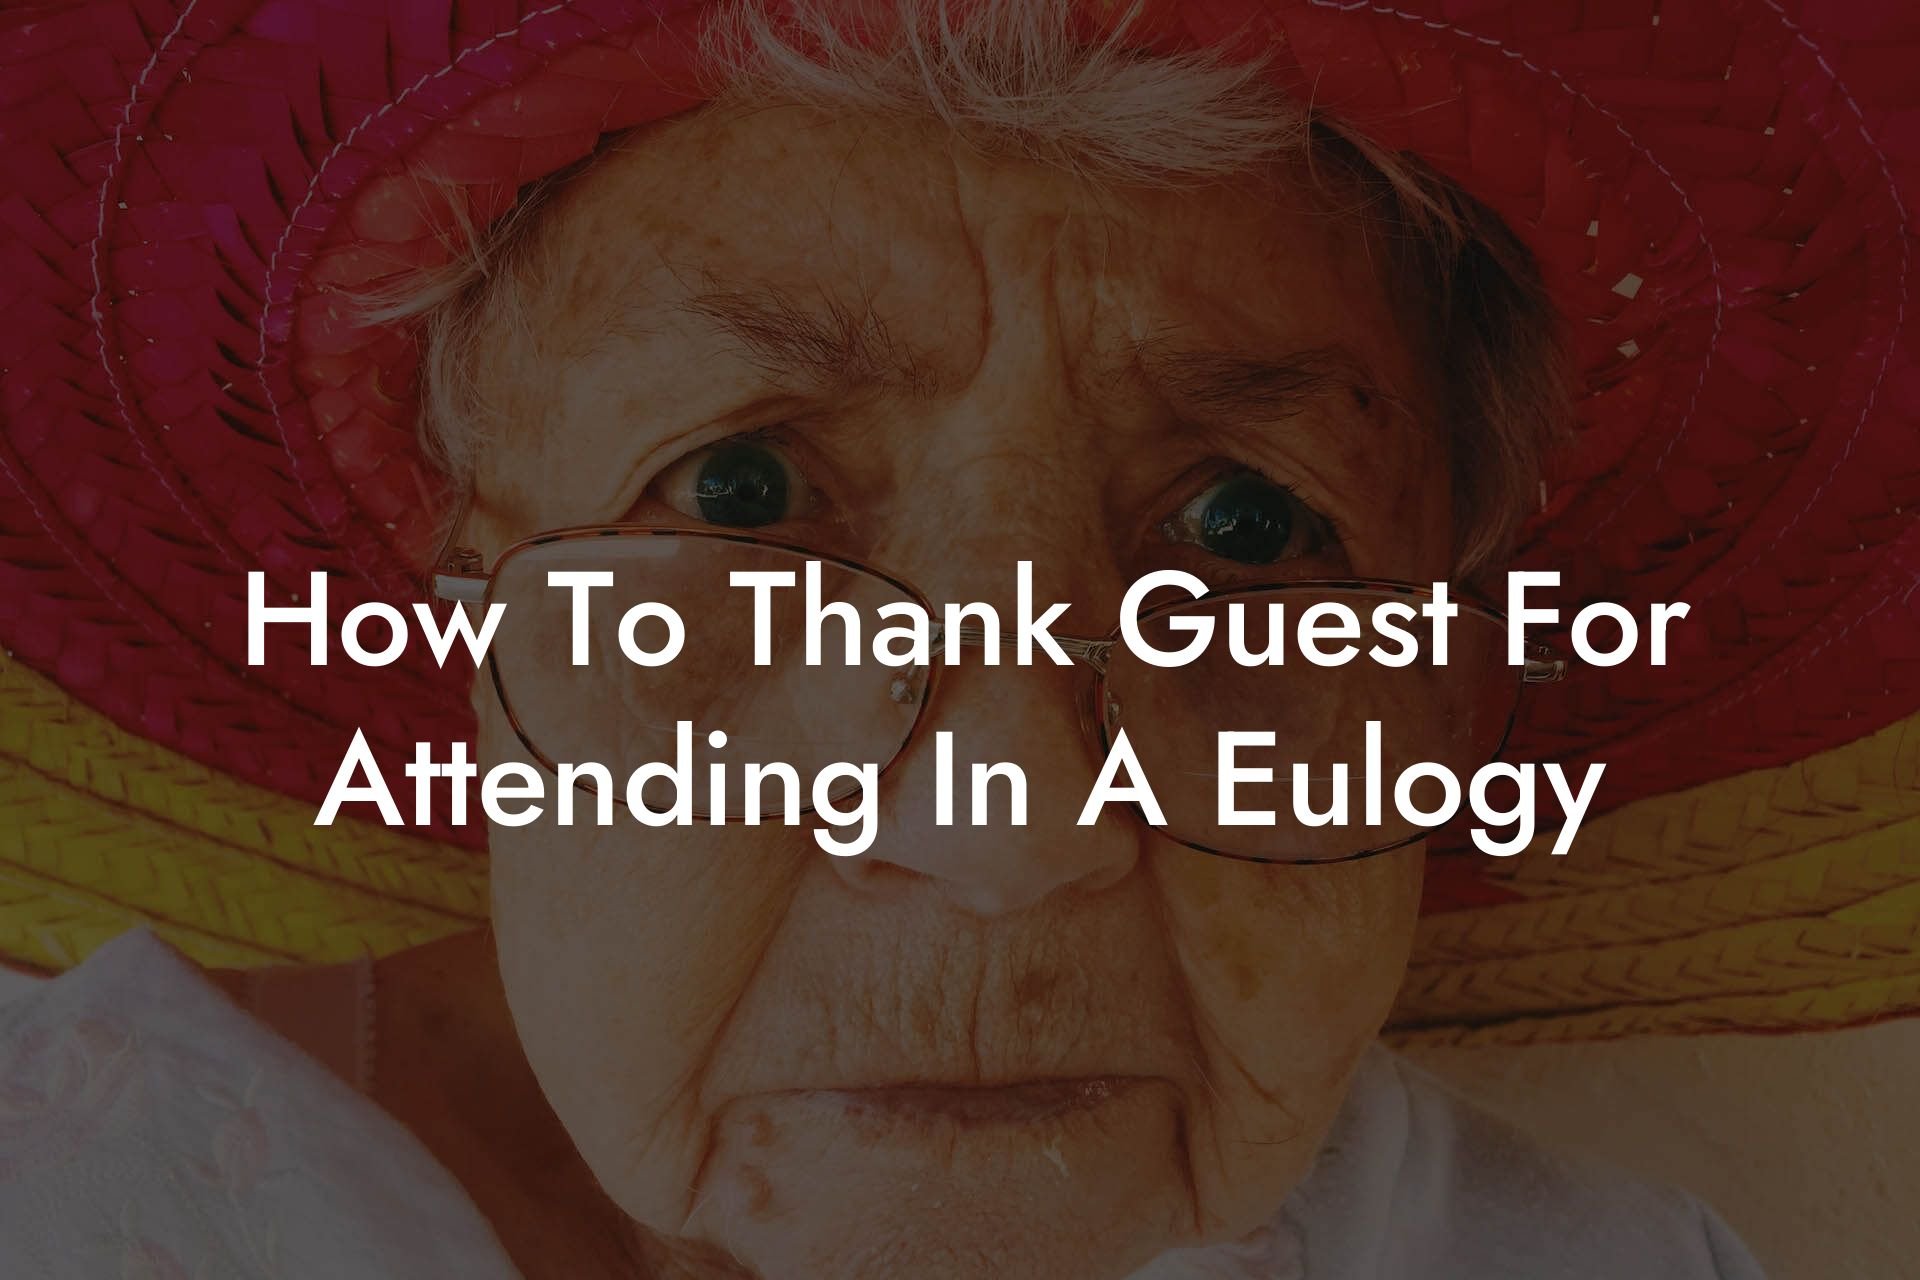 How To Thank Guest For Attending In A Eulogy